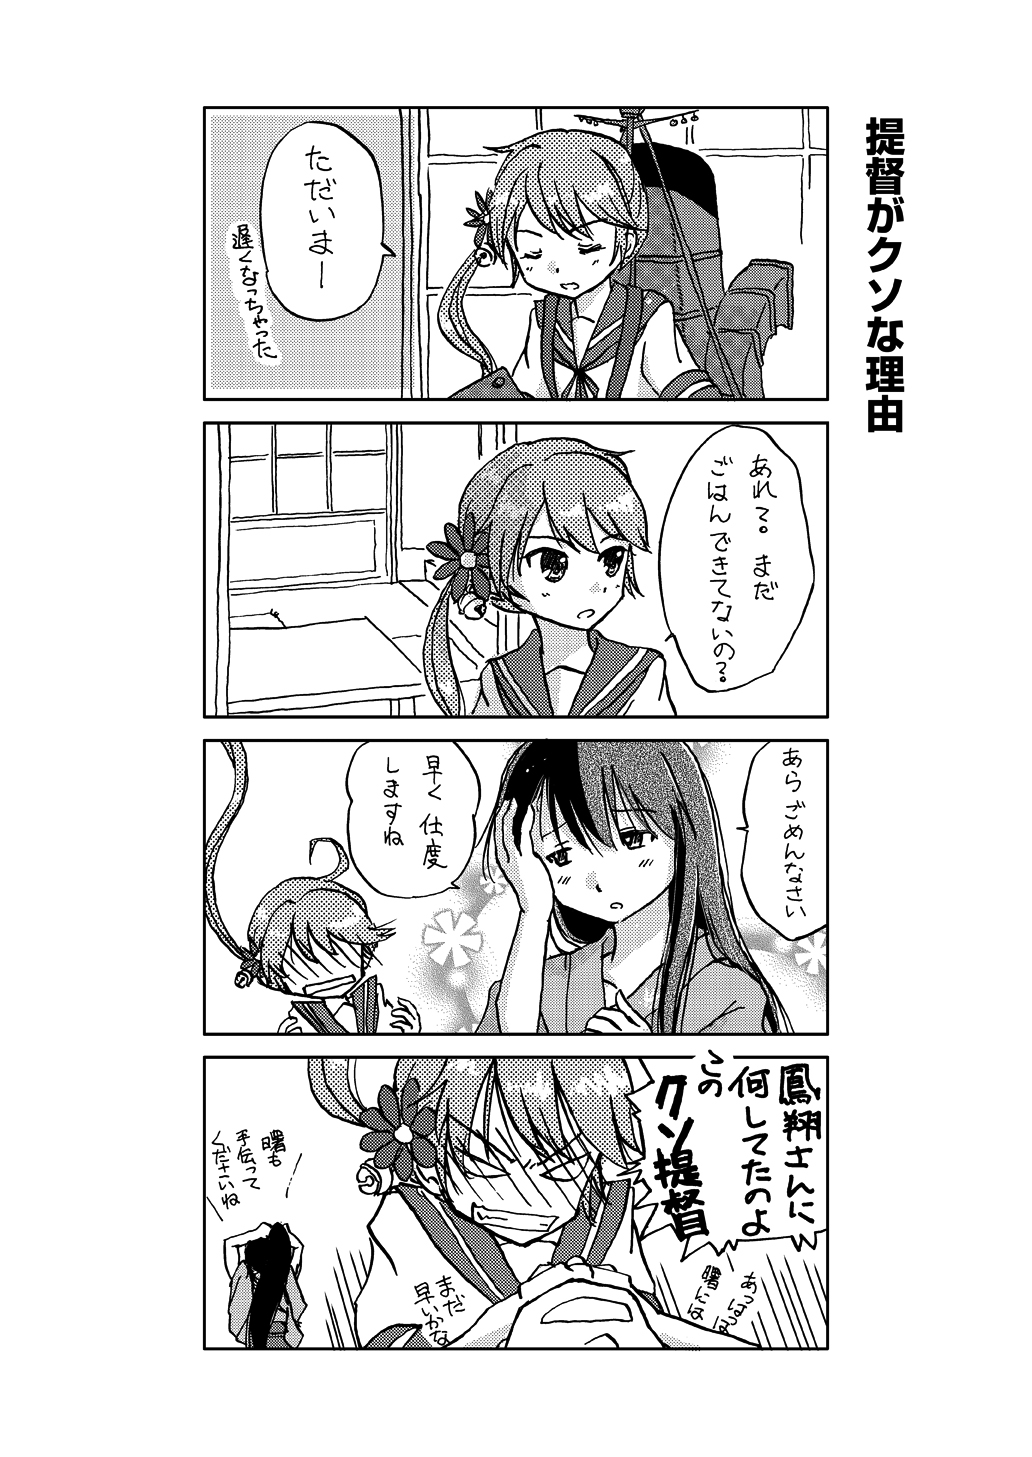 2girls 4koma akebono_(kantai_collection) alternate_hairstyle comic hair_down hair_ornament highres houshou_(kantai_collection) kantai_collection long_hair monochrome multiple_girls personification ponytail school_uniform side_ponytail tying_hair